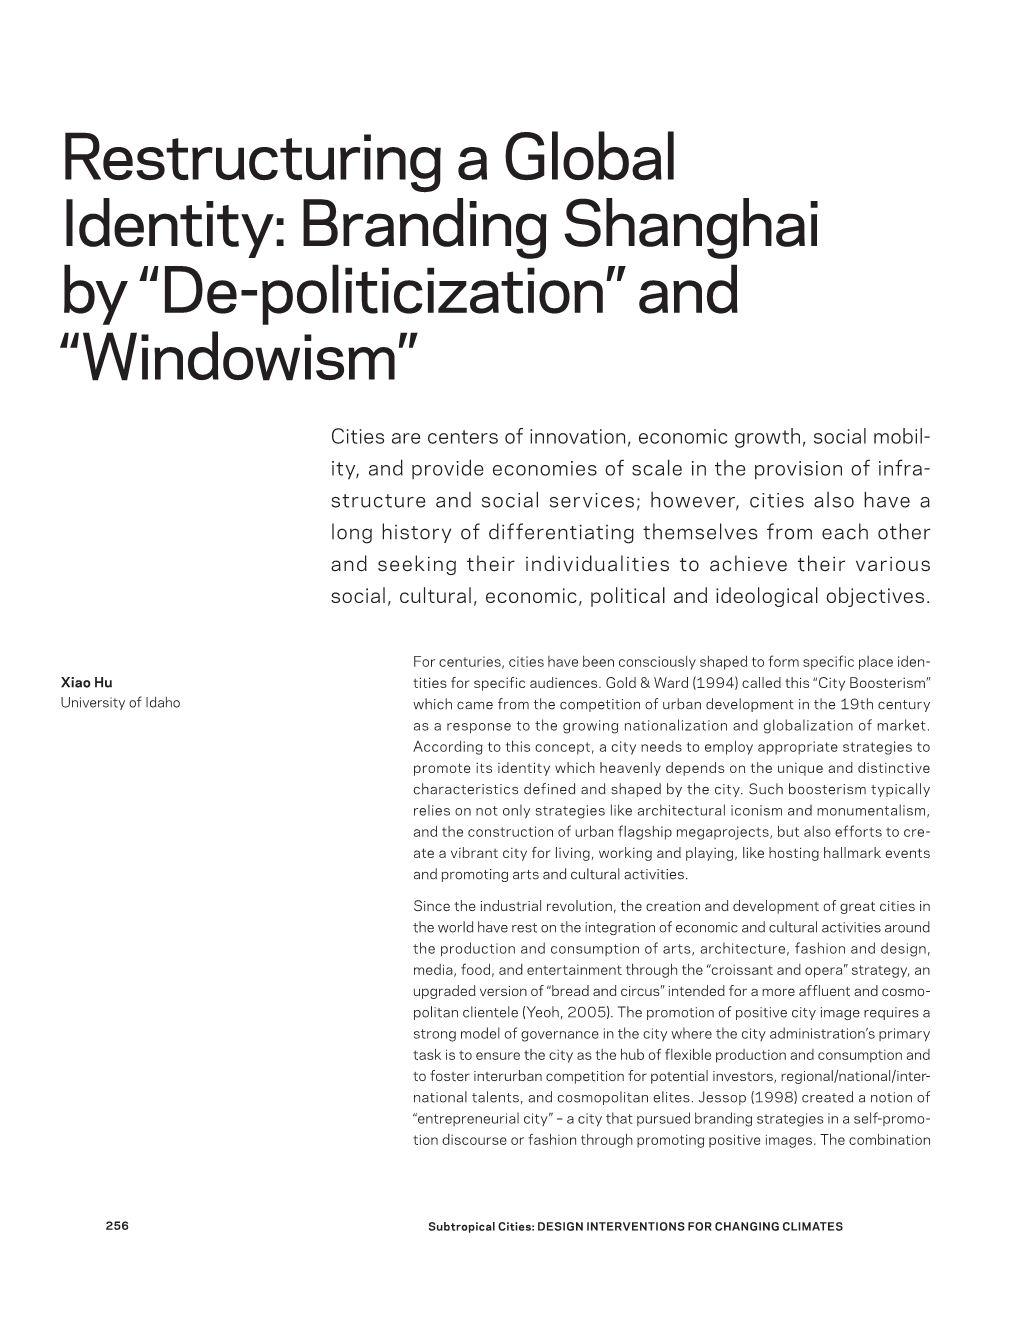 Restructuring a Global Identity: Branding Shanghai by “De-Politicization” and “Windowism”